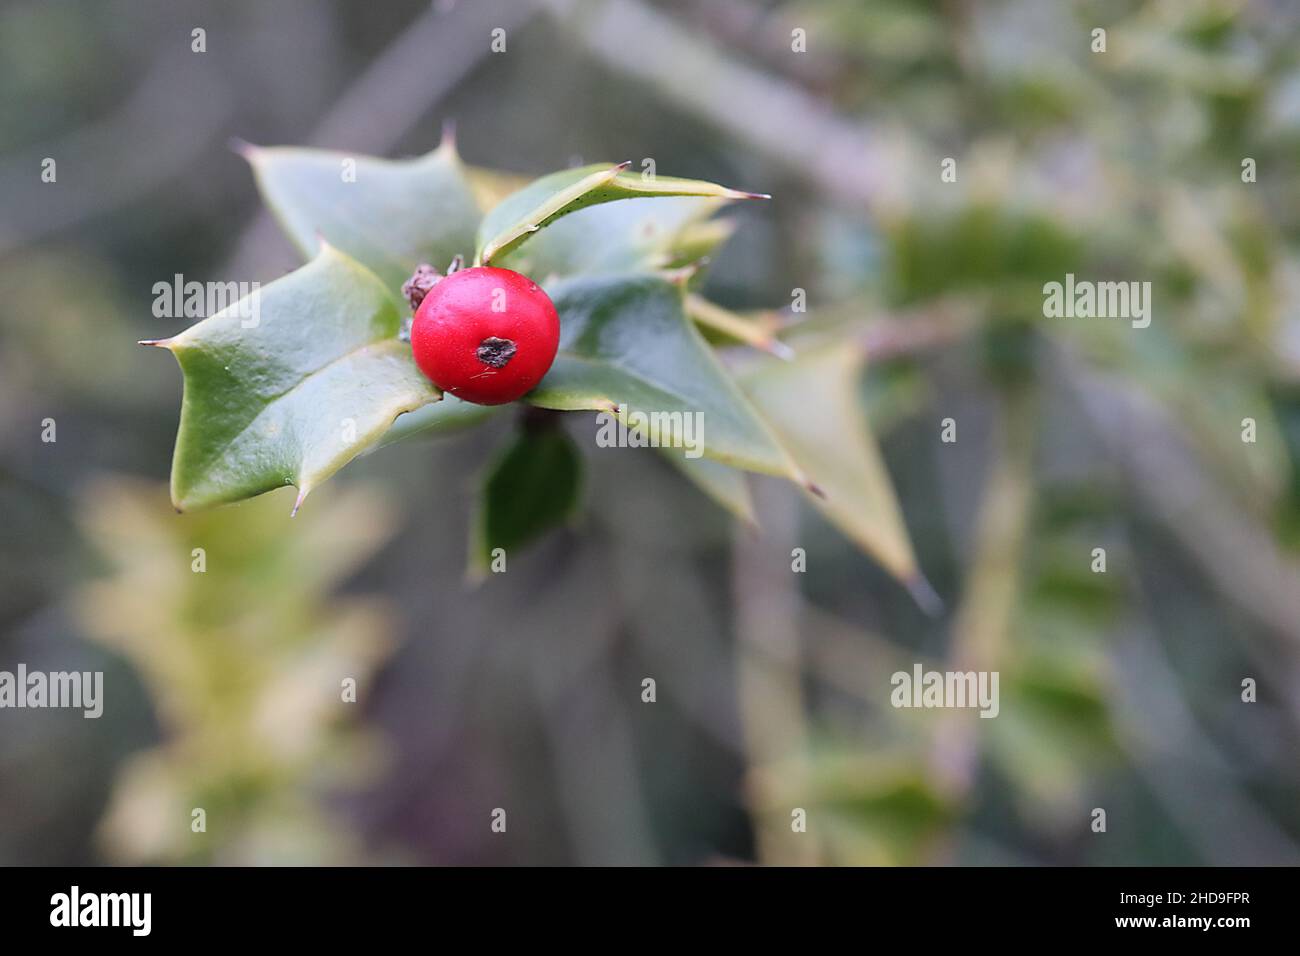 Ilex pernyi Perny’s holly – singular red berry and small mid green triangular spiny leaves,  December, England, UK Stock Photo